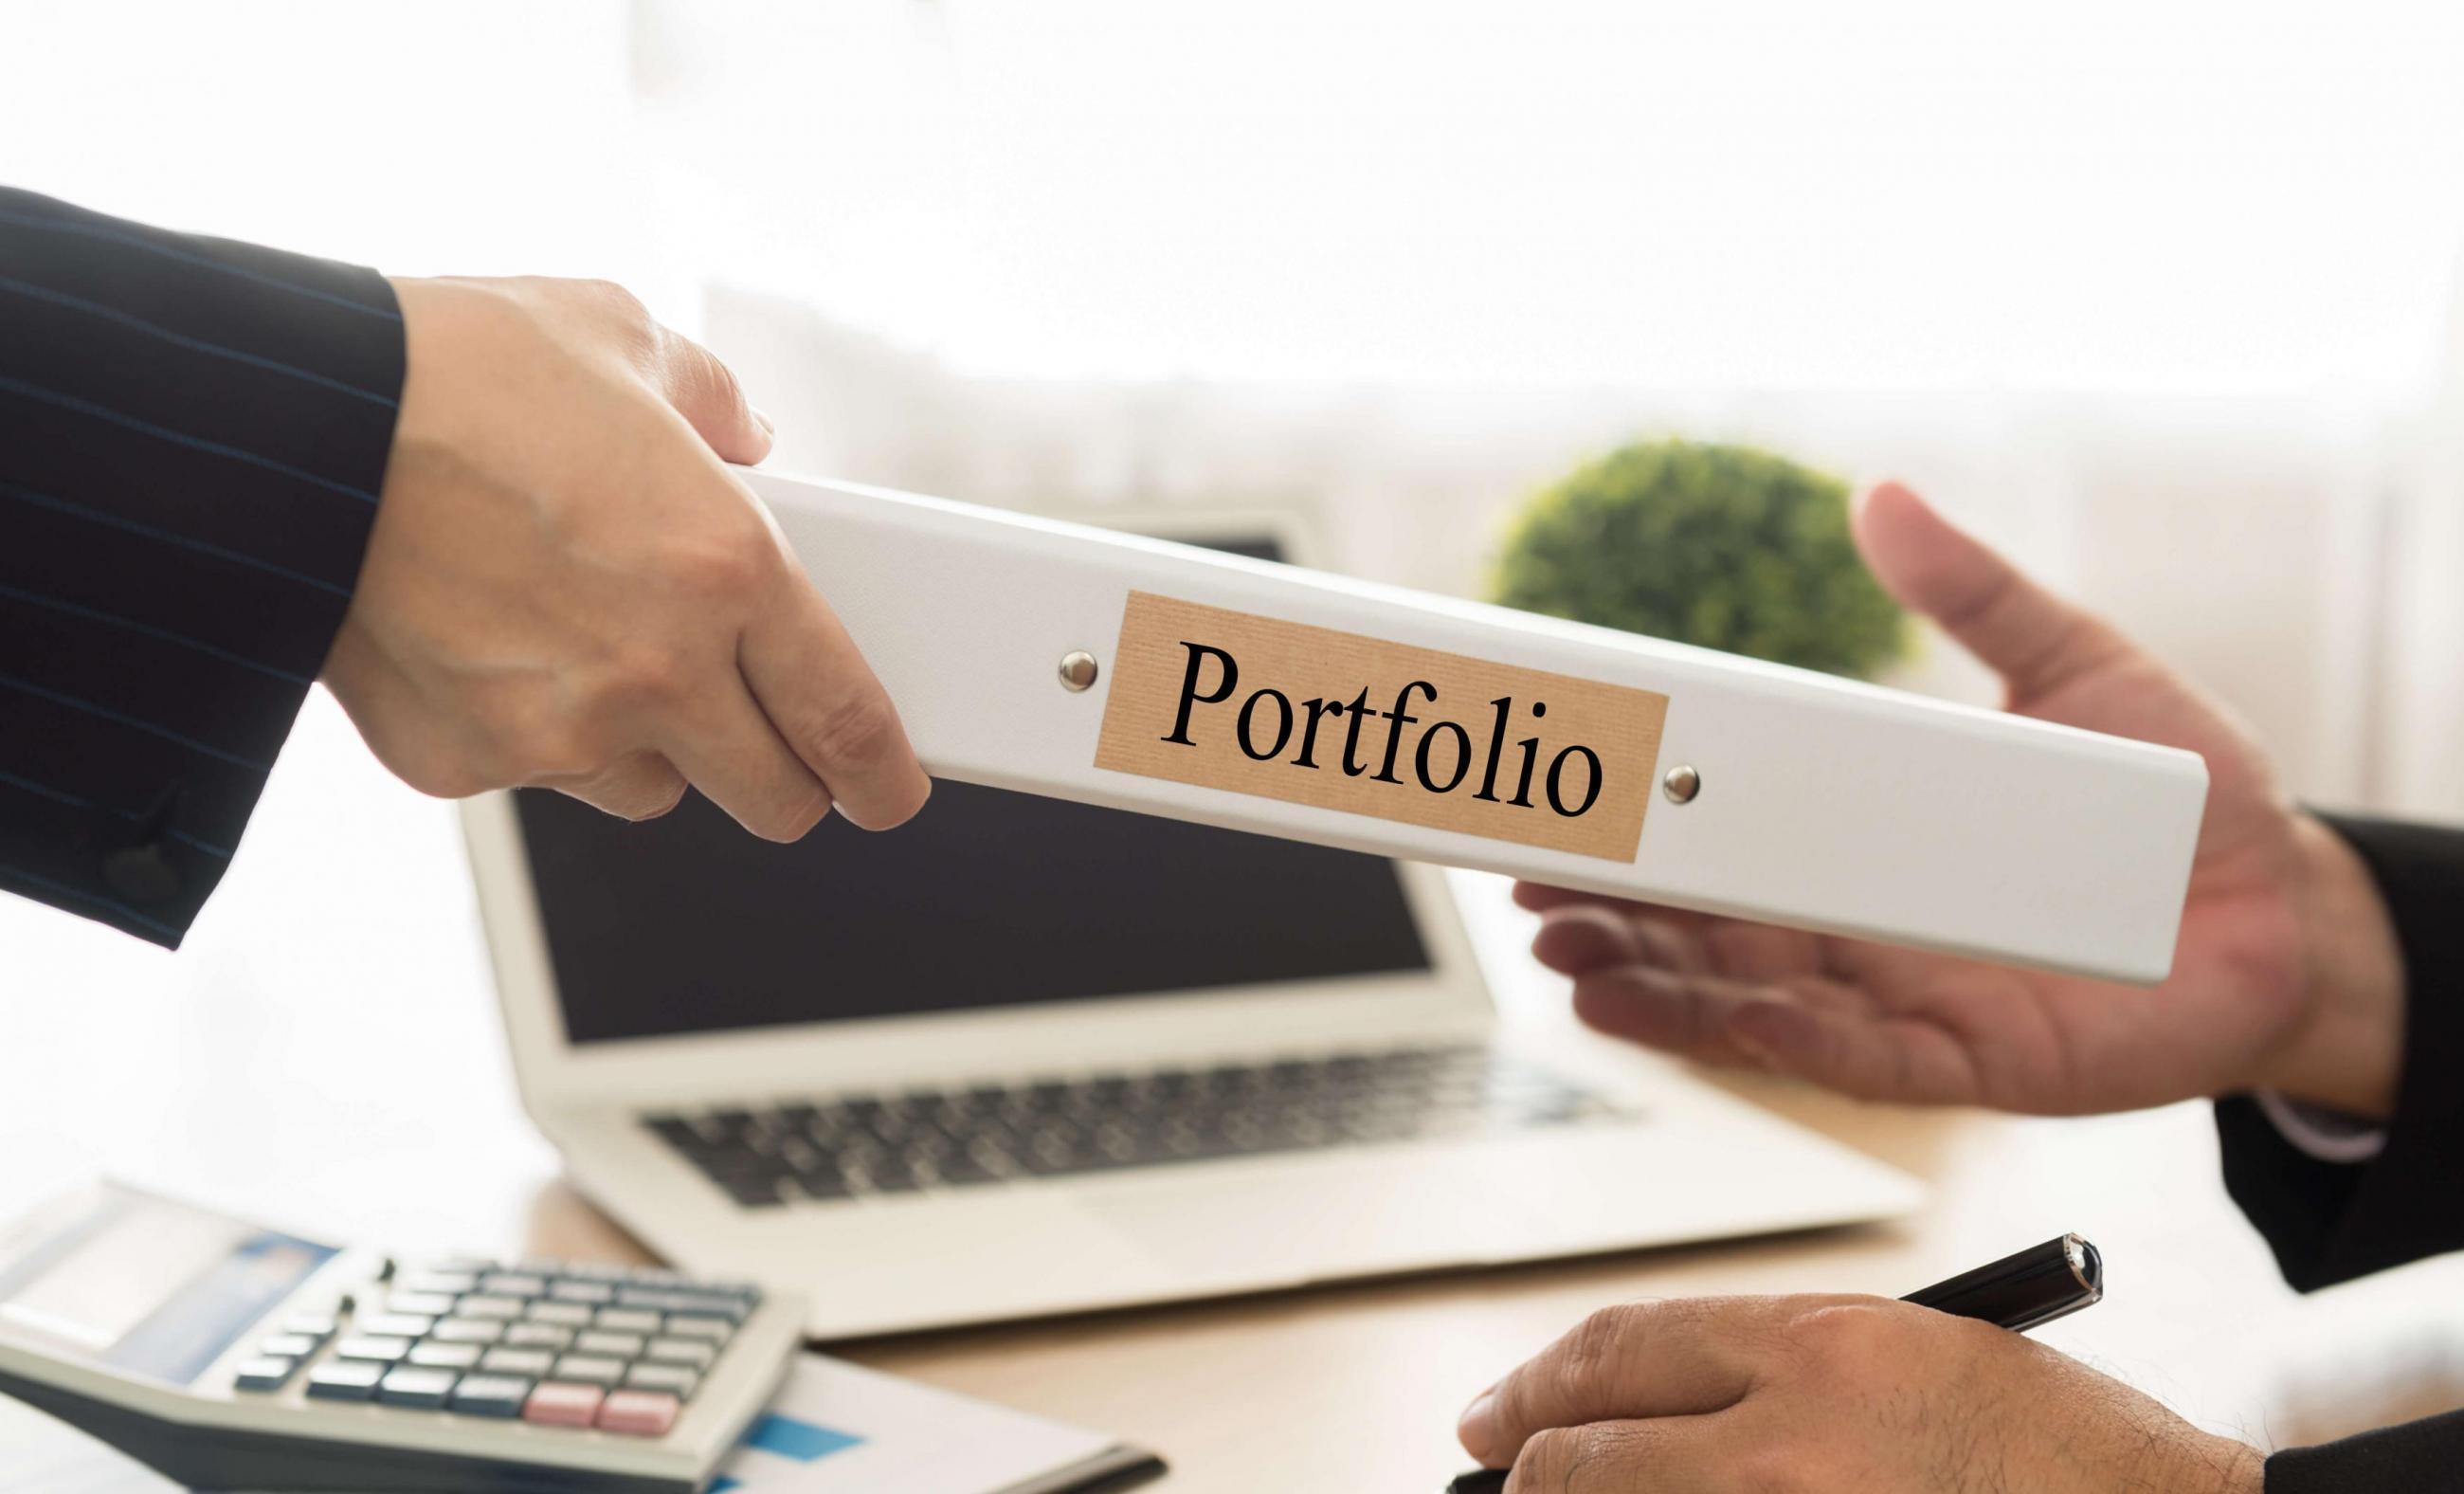 Is your technology portfolio robust in the current environment?